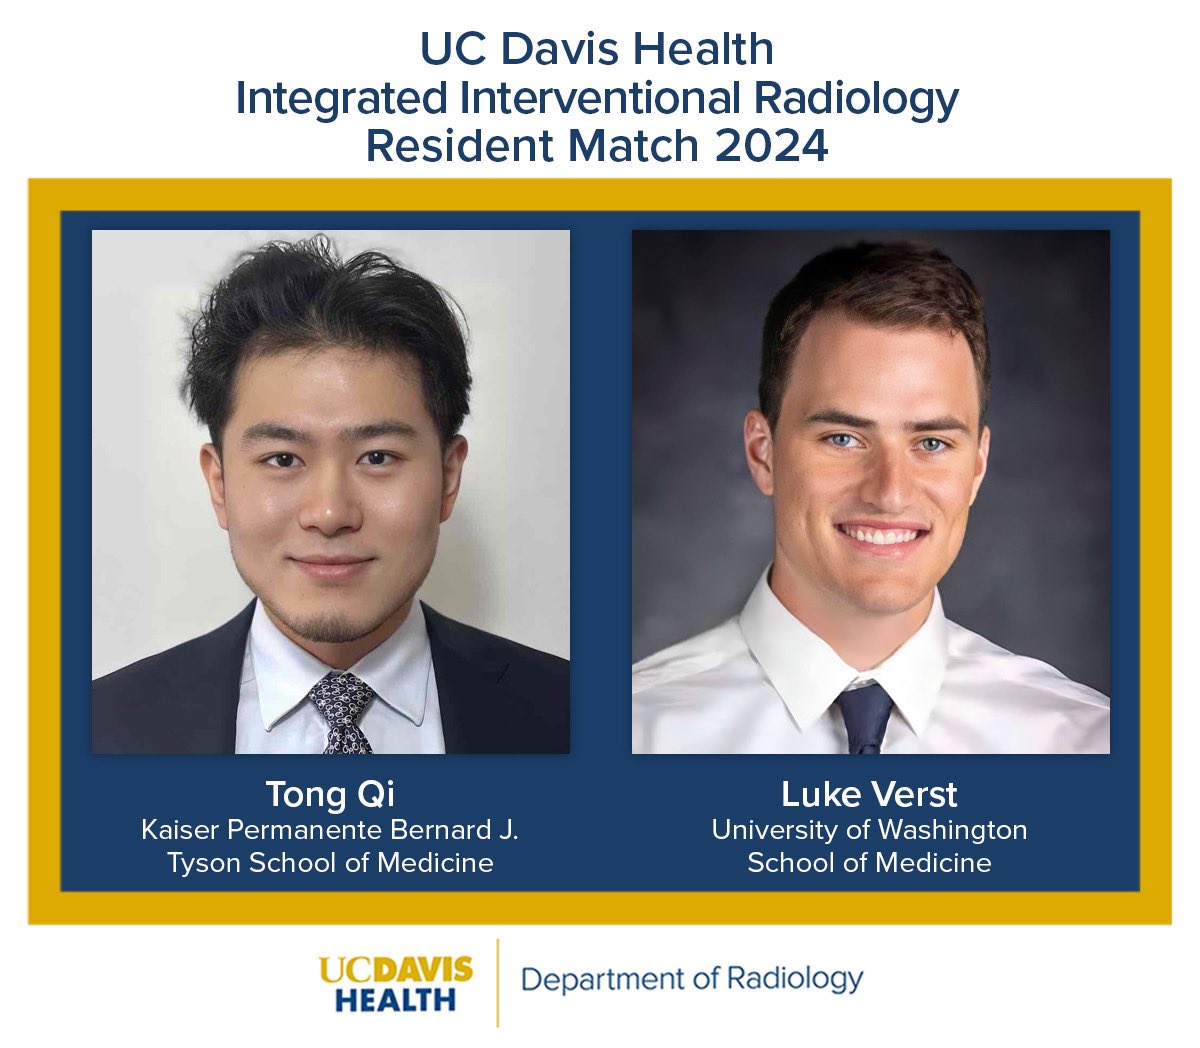 Congratulations to our 2 incoming IR residents, Tong Qi (Kaiser) and Luke Verst (University of Washington). Welcome to UC Davis VIR! @SIRspecialists @UCDavisHealth @UCDRadiology @UCDRadRes